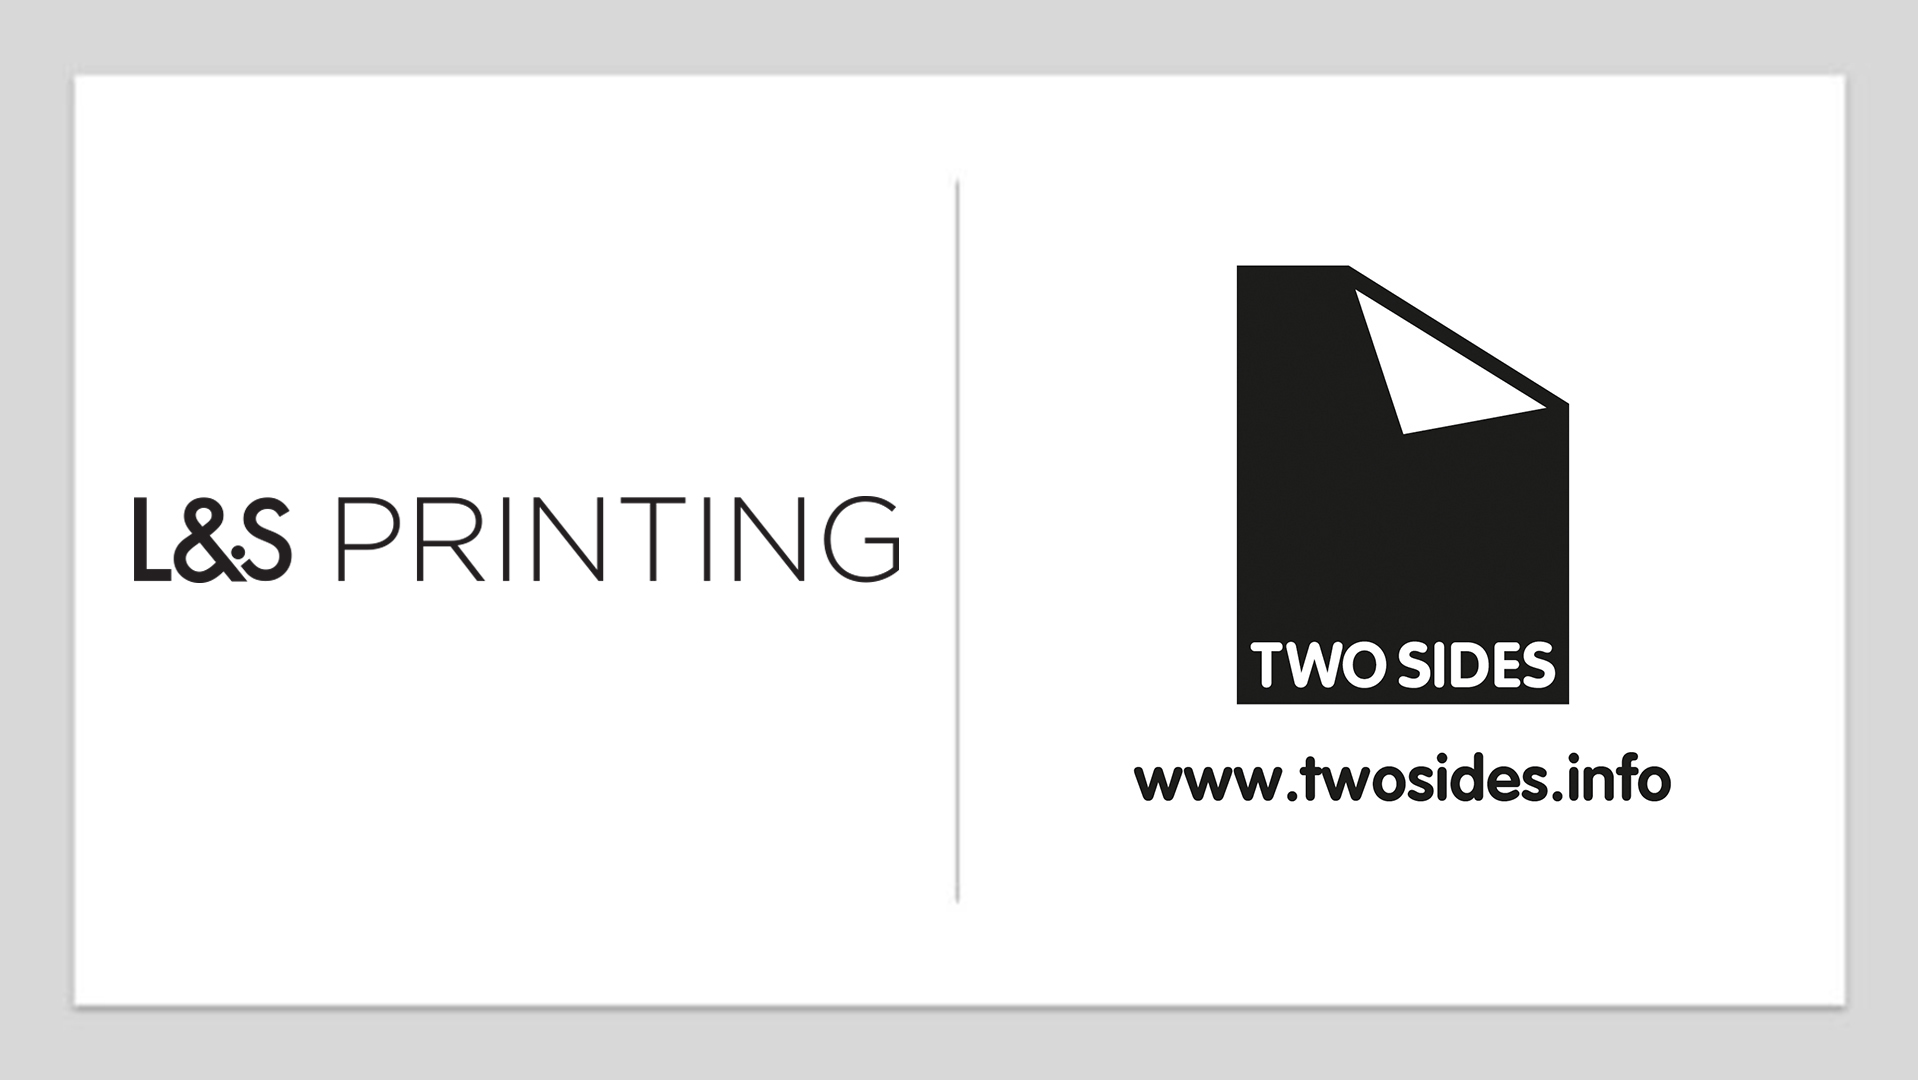 L&S Printing Join Two Sides To Promote Sustainable Print 